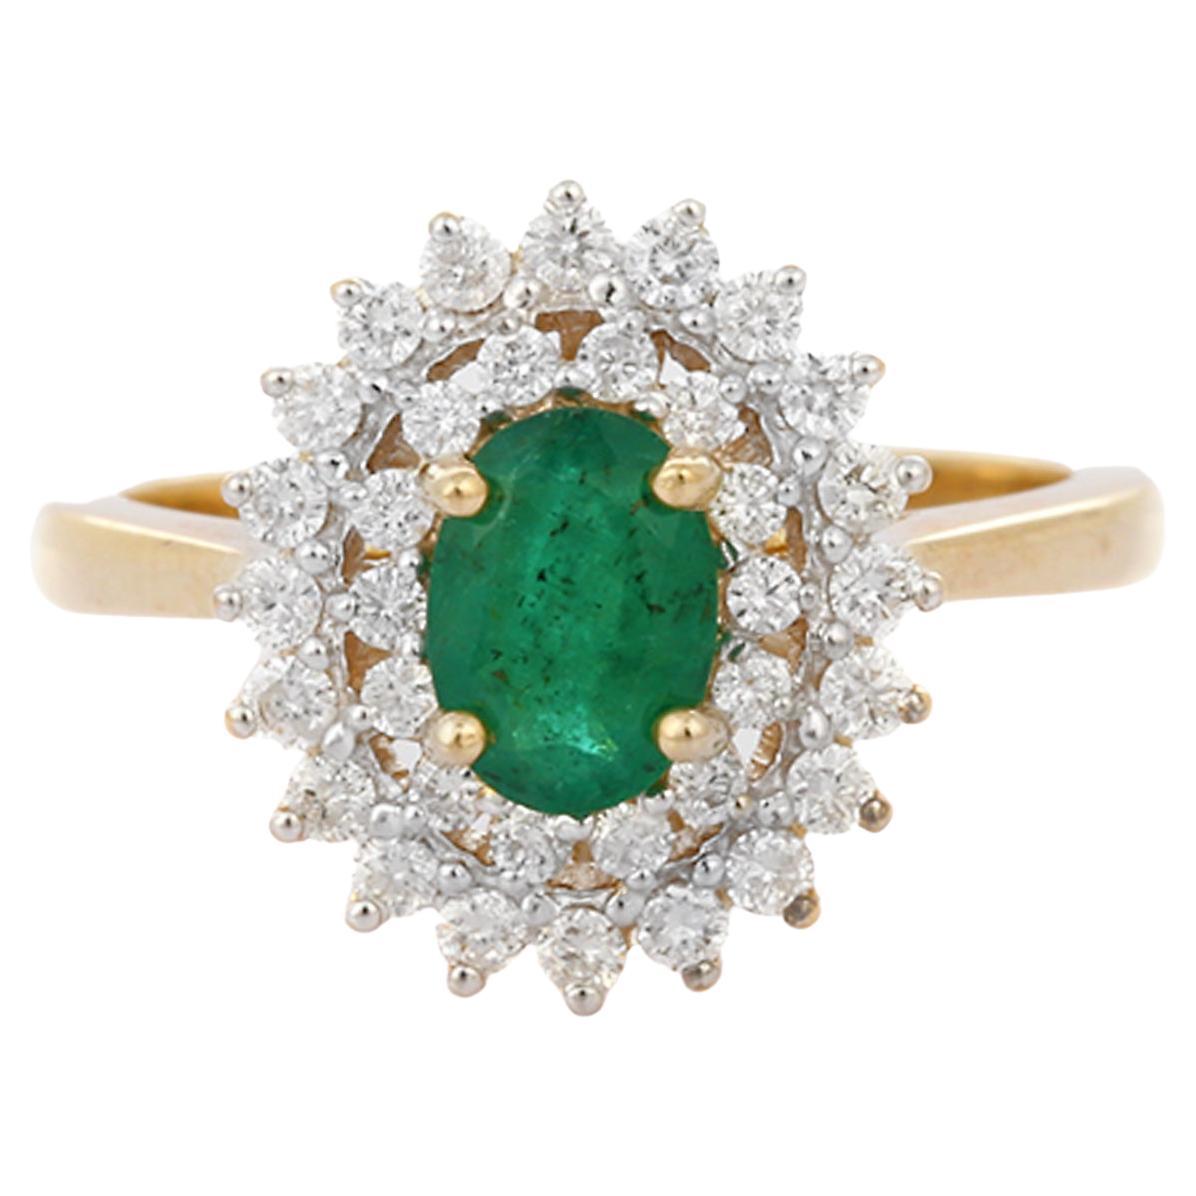 For Sale:  14K Yellow Gold Designer Oval Cut Emerald Ring Mounted with Layers of Diamonds